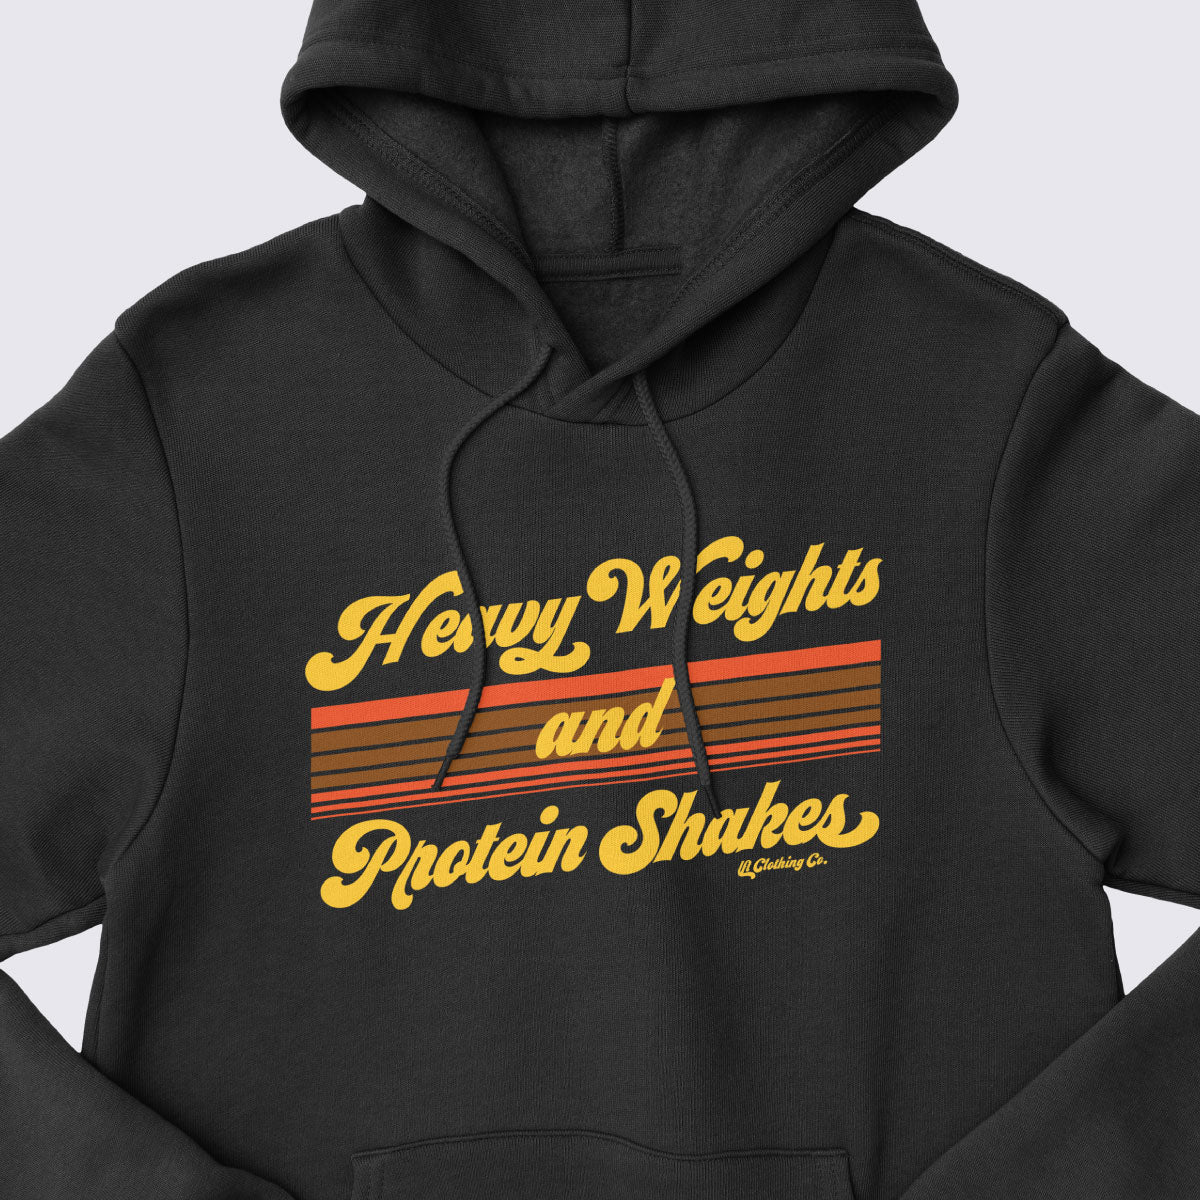 Heavy Weights & Protein Shakes Core Fleece Pullover Hooded